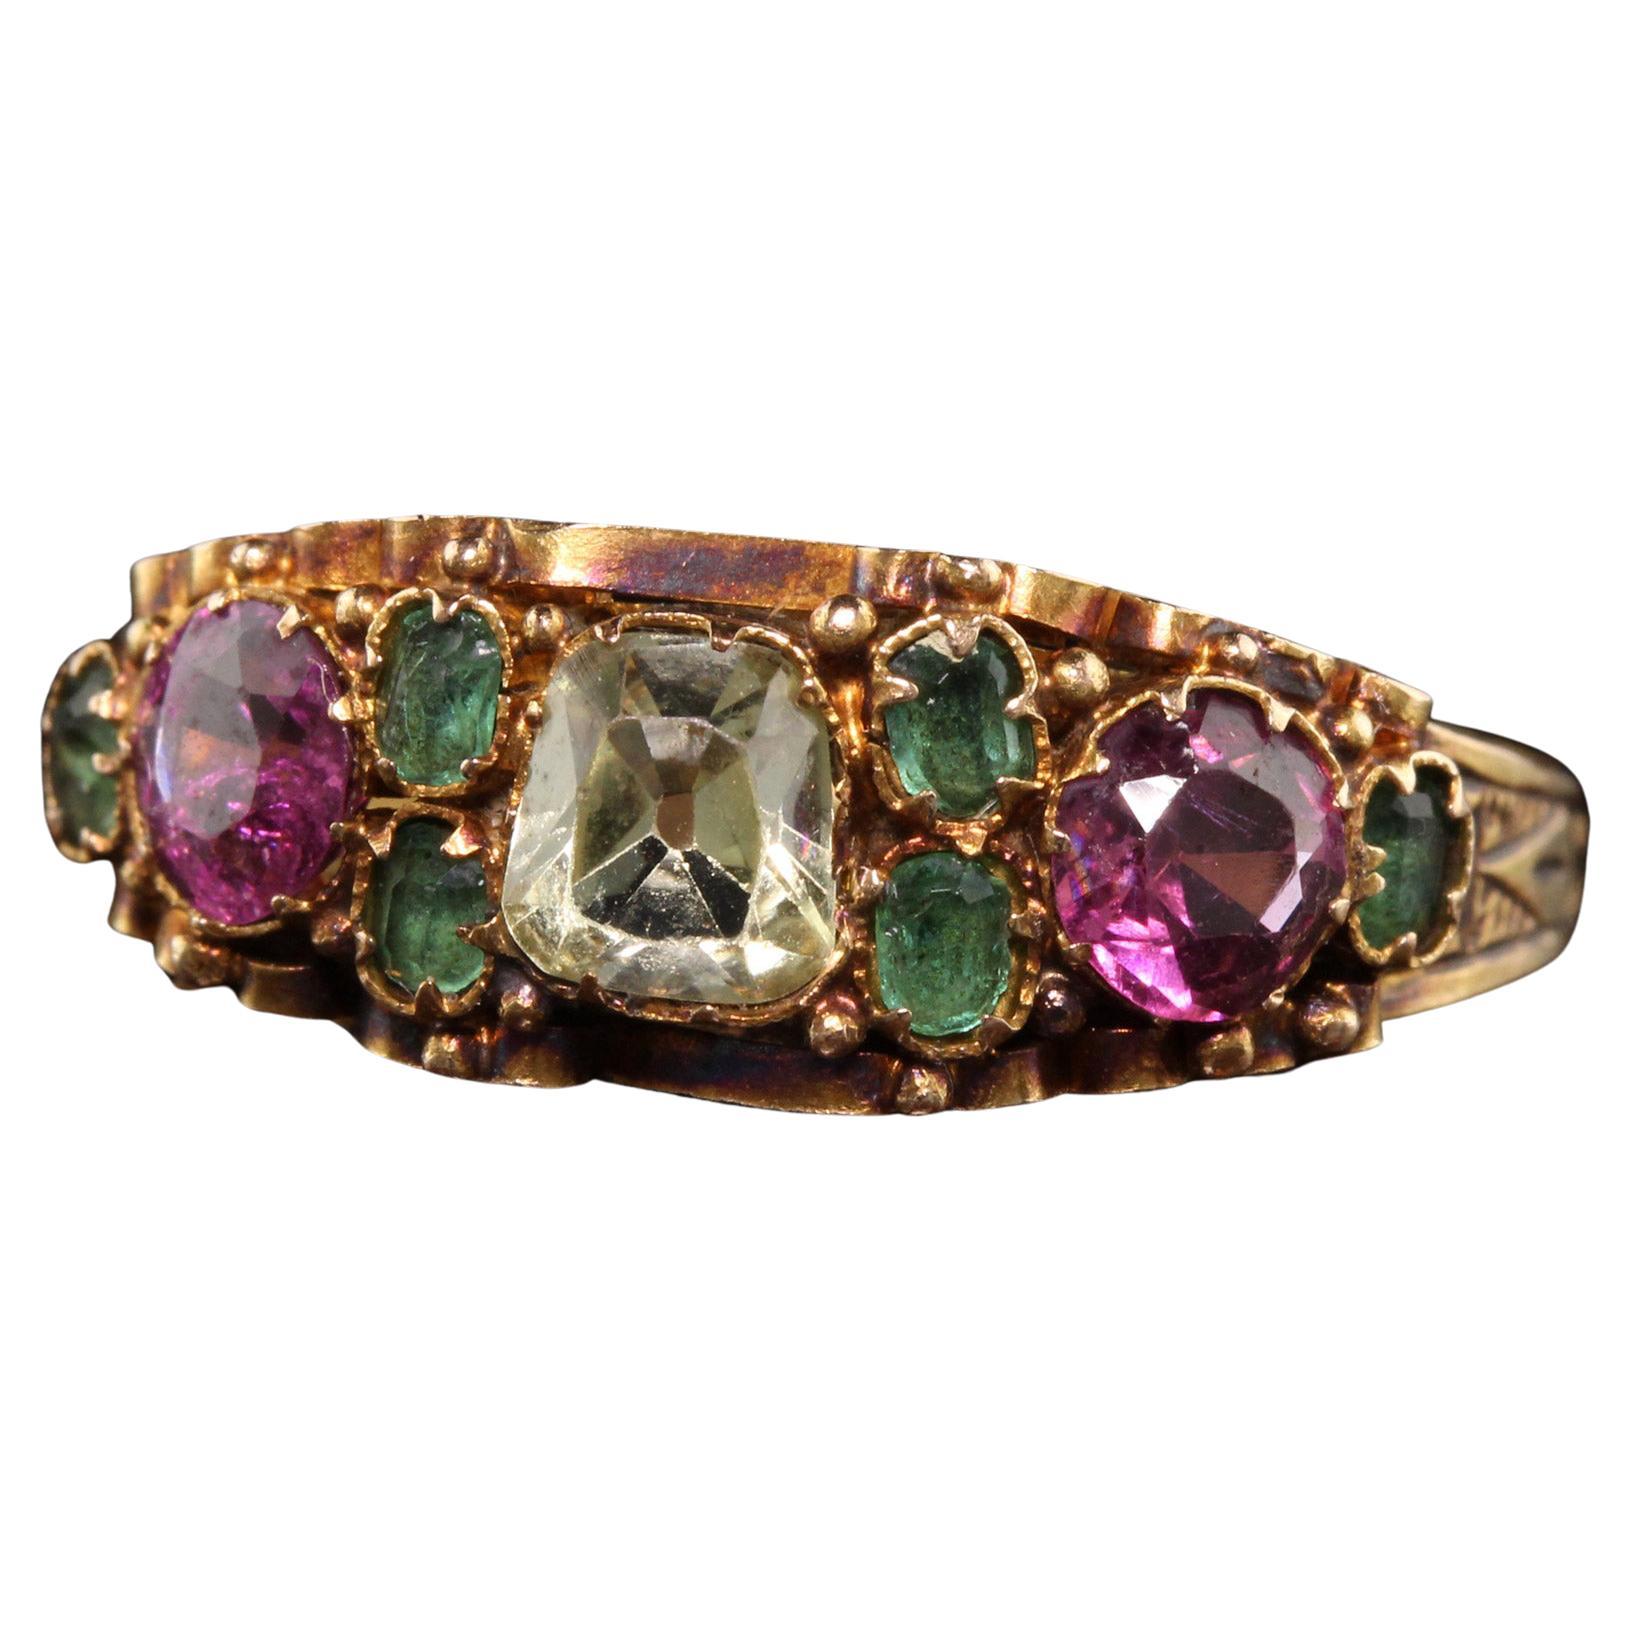 Antique Victorian 15K Yellow Gold Ruby Emerald and Chrysoberyl Engraved Ring